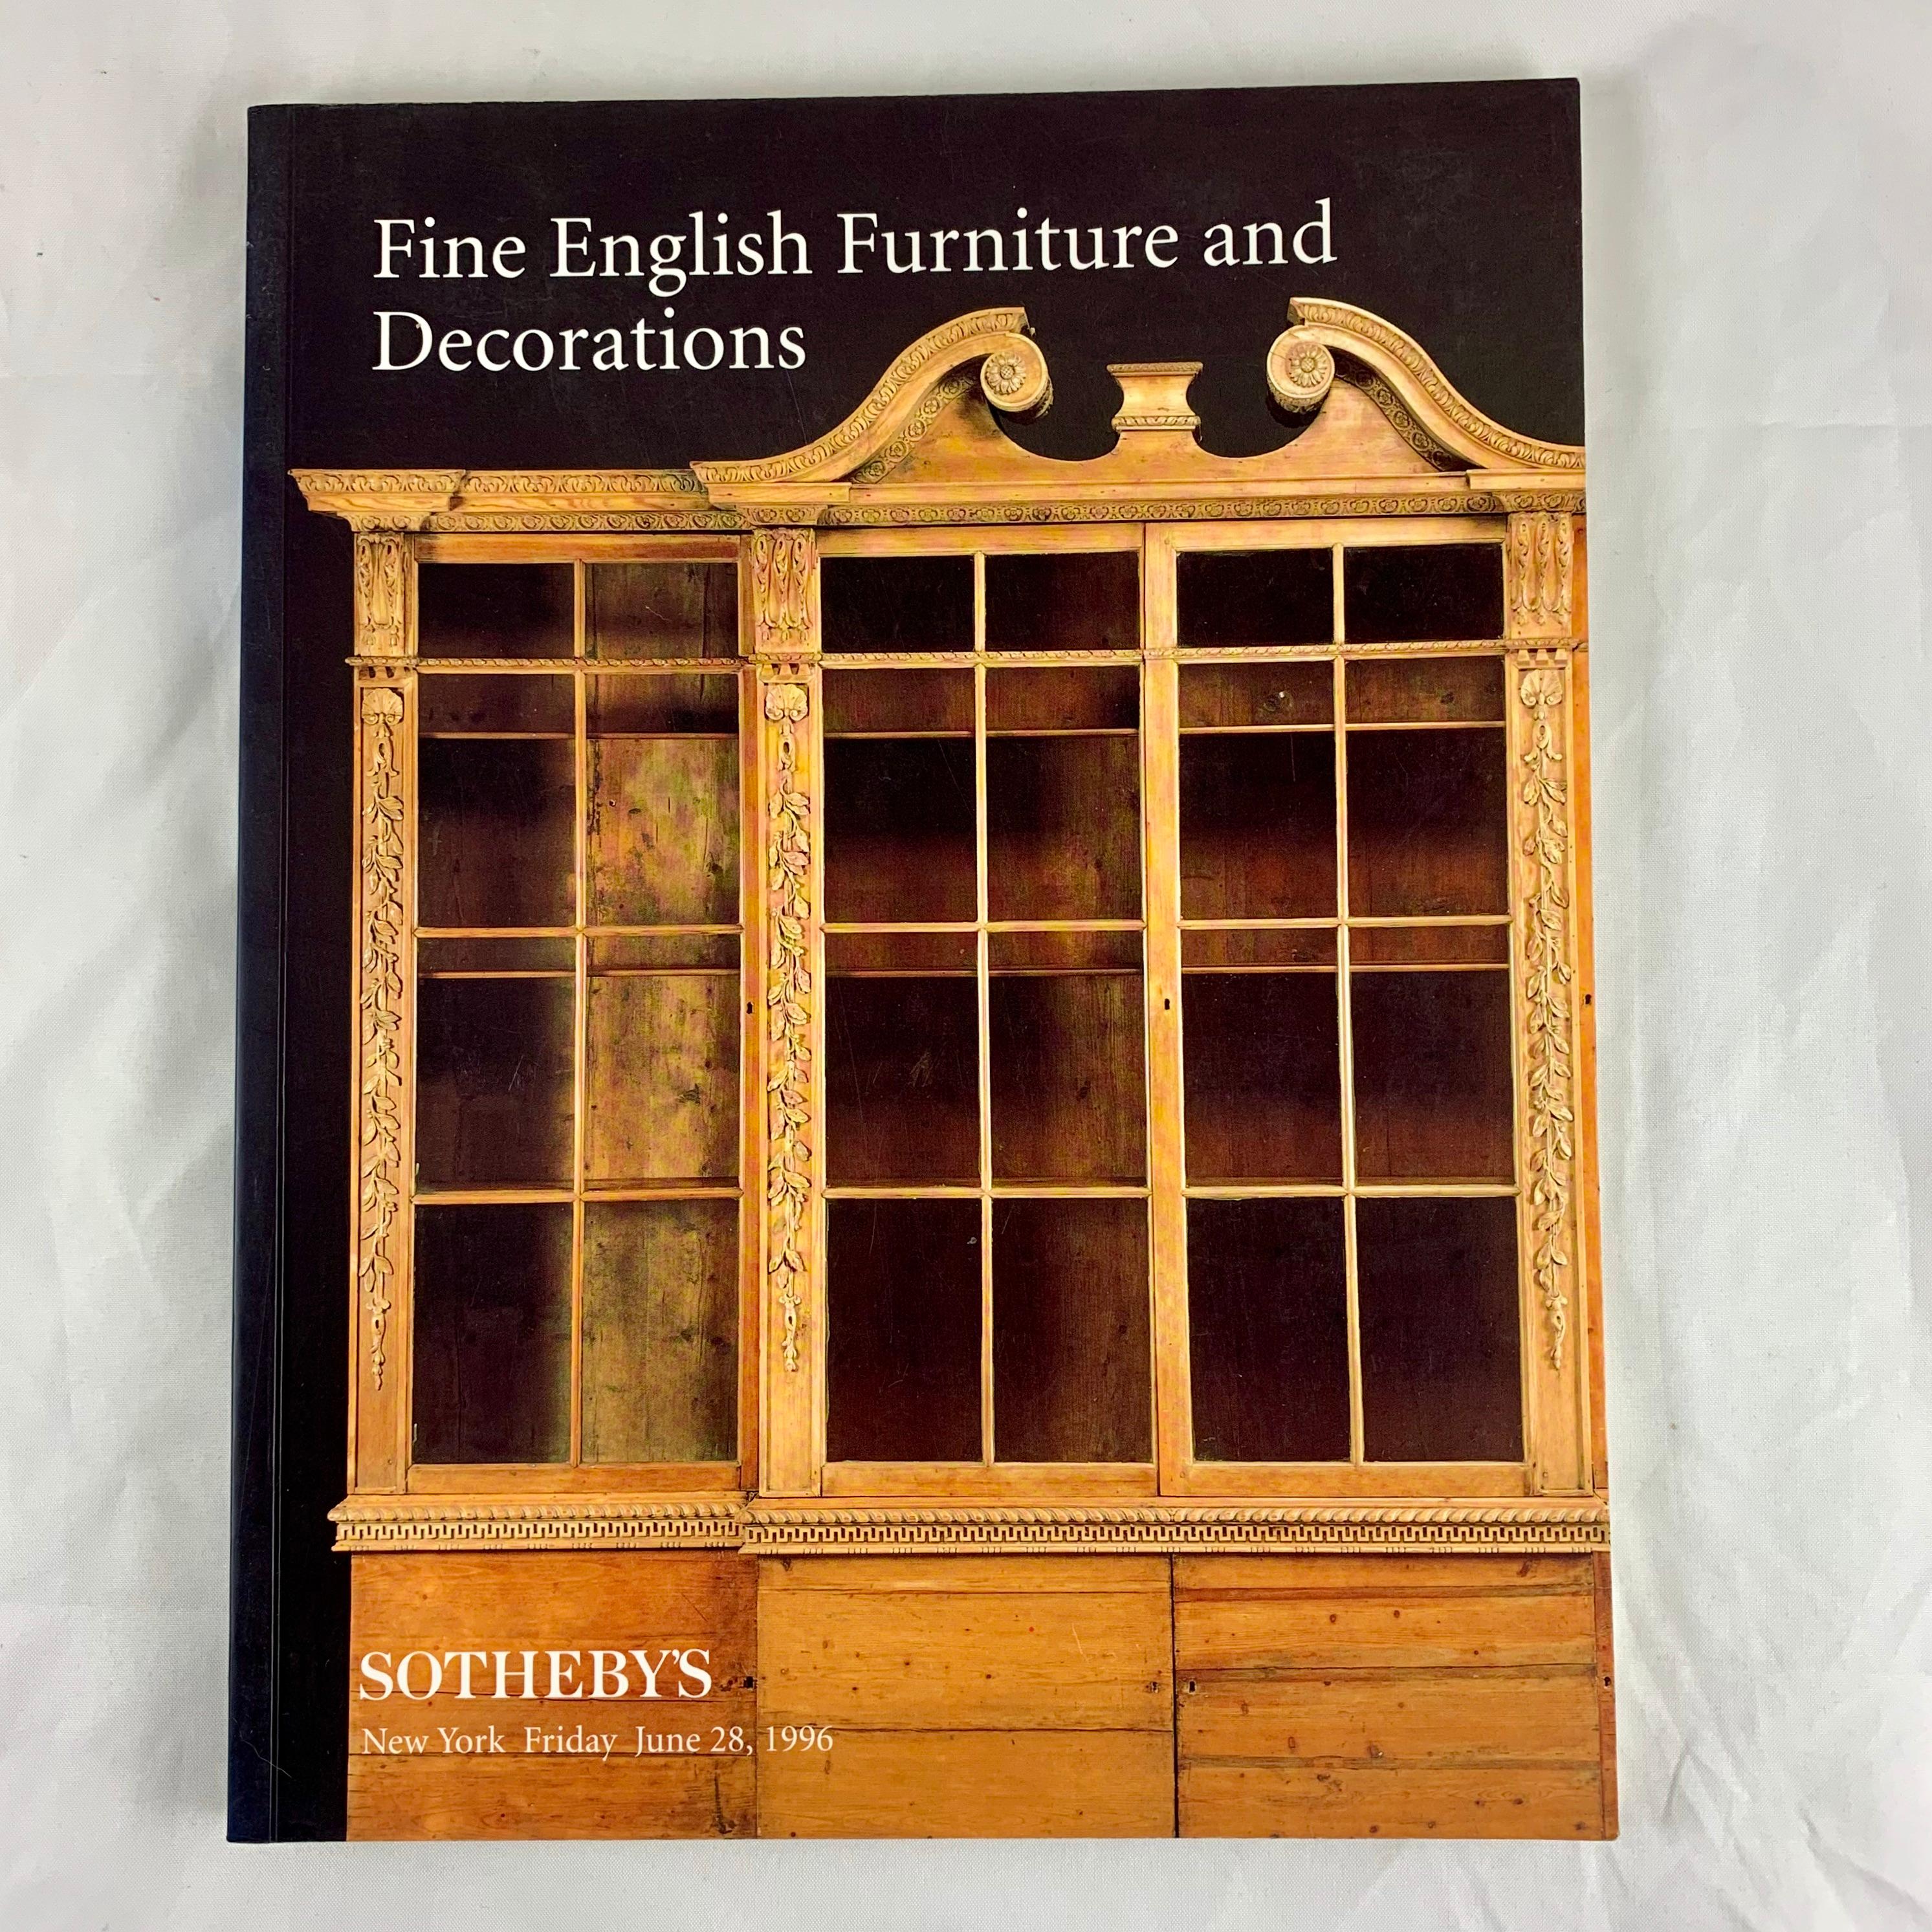 A pair of auction catalogues from the Sotheby's New York sales of Fine English Furniture and Decorations.

Dated: Saturday, January 27th, 1996 - Sale No. 6802
 Friday, June 28th, 1996 - Sale No. 6871

Sotheby's catalogues are an excellent and